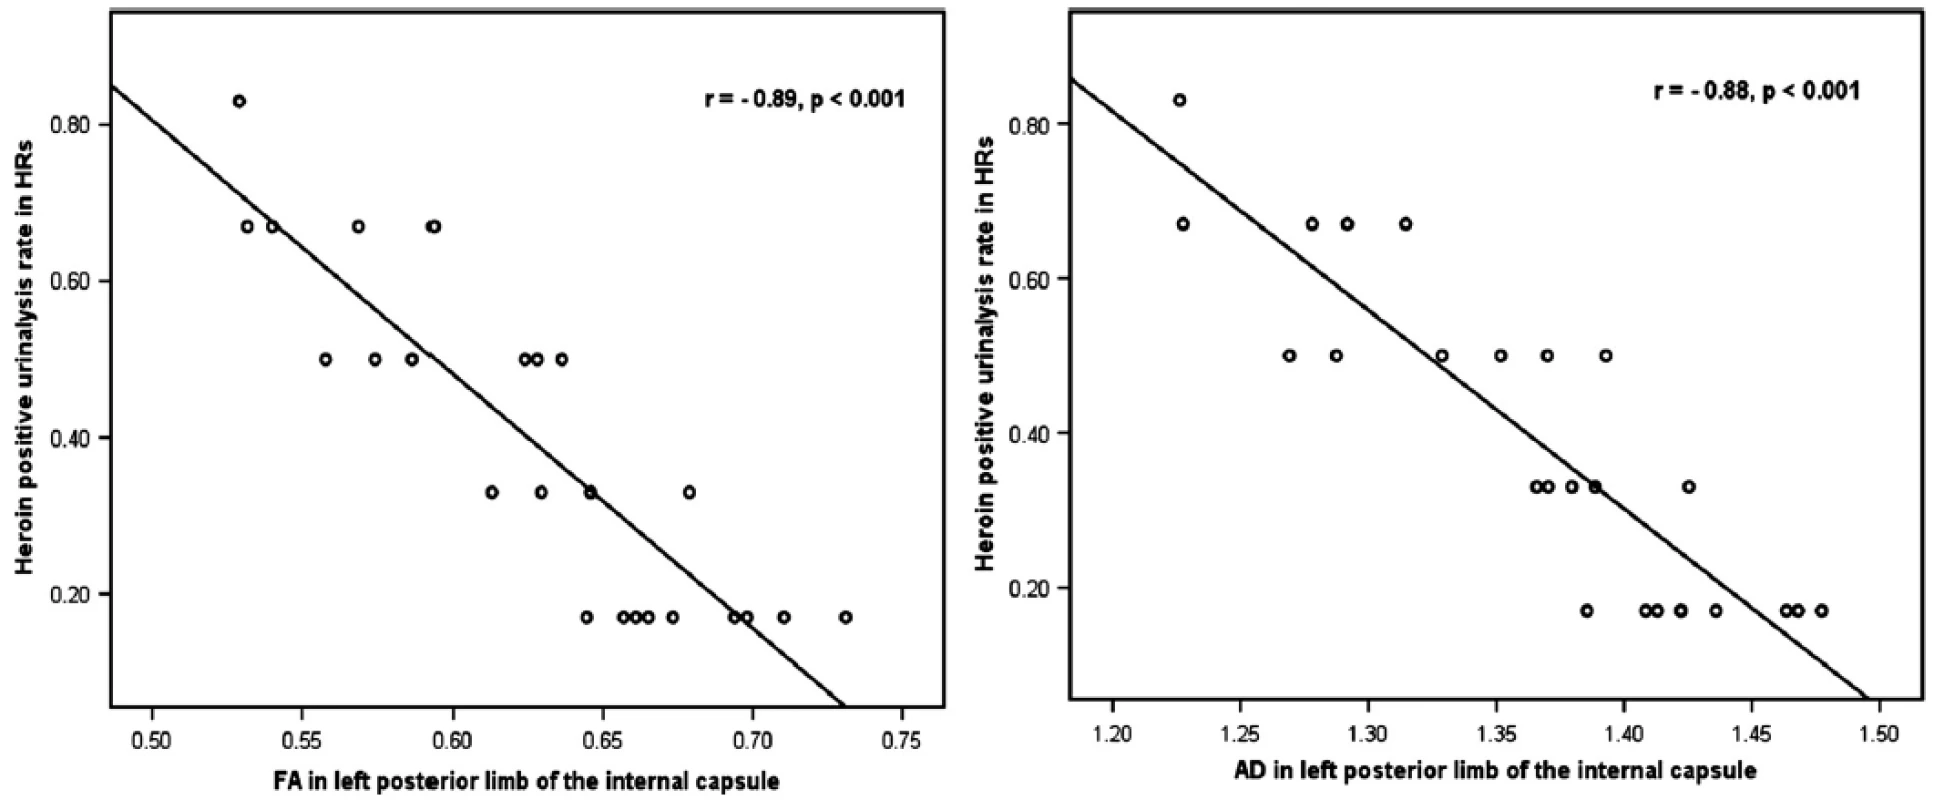 Graphical presentation of significant correlations between the heroin-positive urinalysis rate (corrected for age, years of education, duration and dosage of smoking, and heroin/methadone use) within 6-month follow-up after baseline and FA/AD values in the left posterior limb of internal capsule in heroin relapsers.